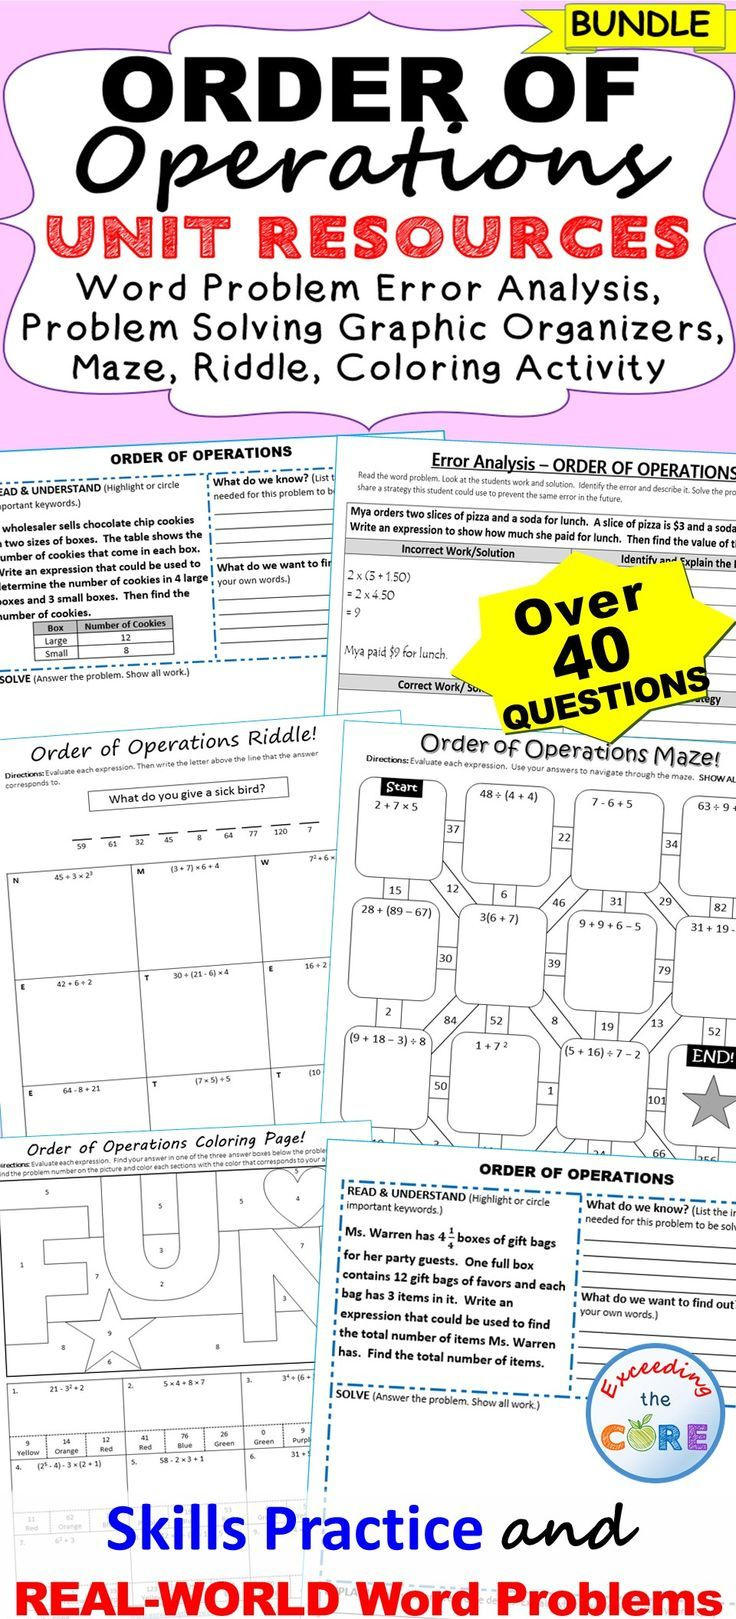 ORDER OF OPERATIONS Error Analysis Problem Solving Graphic Organizers 